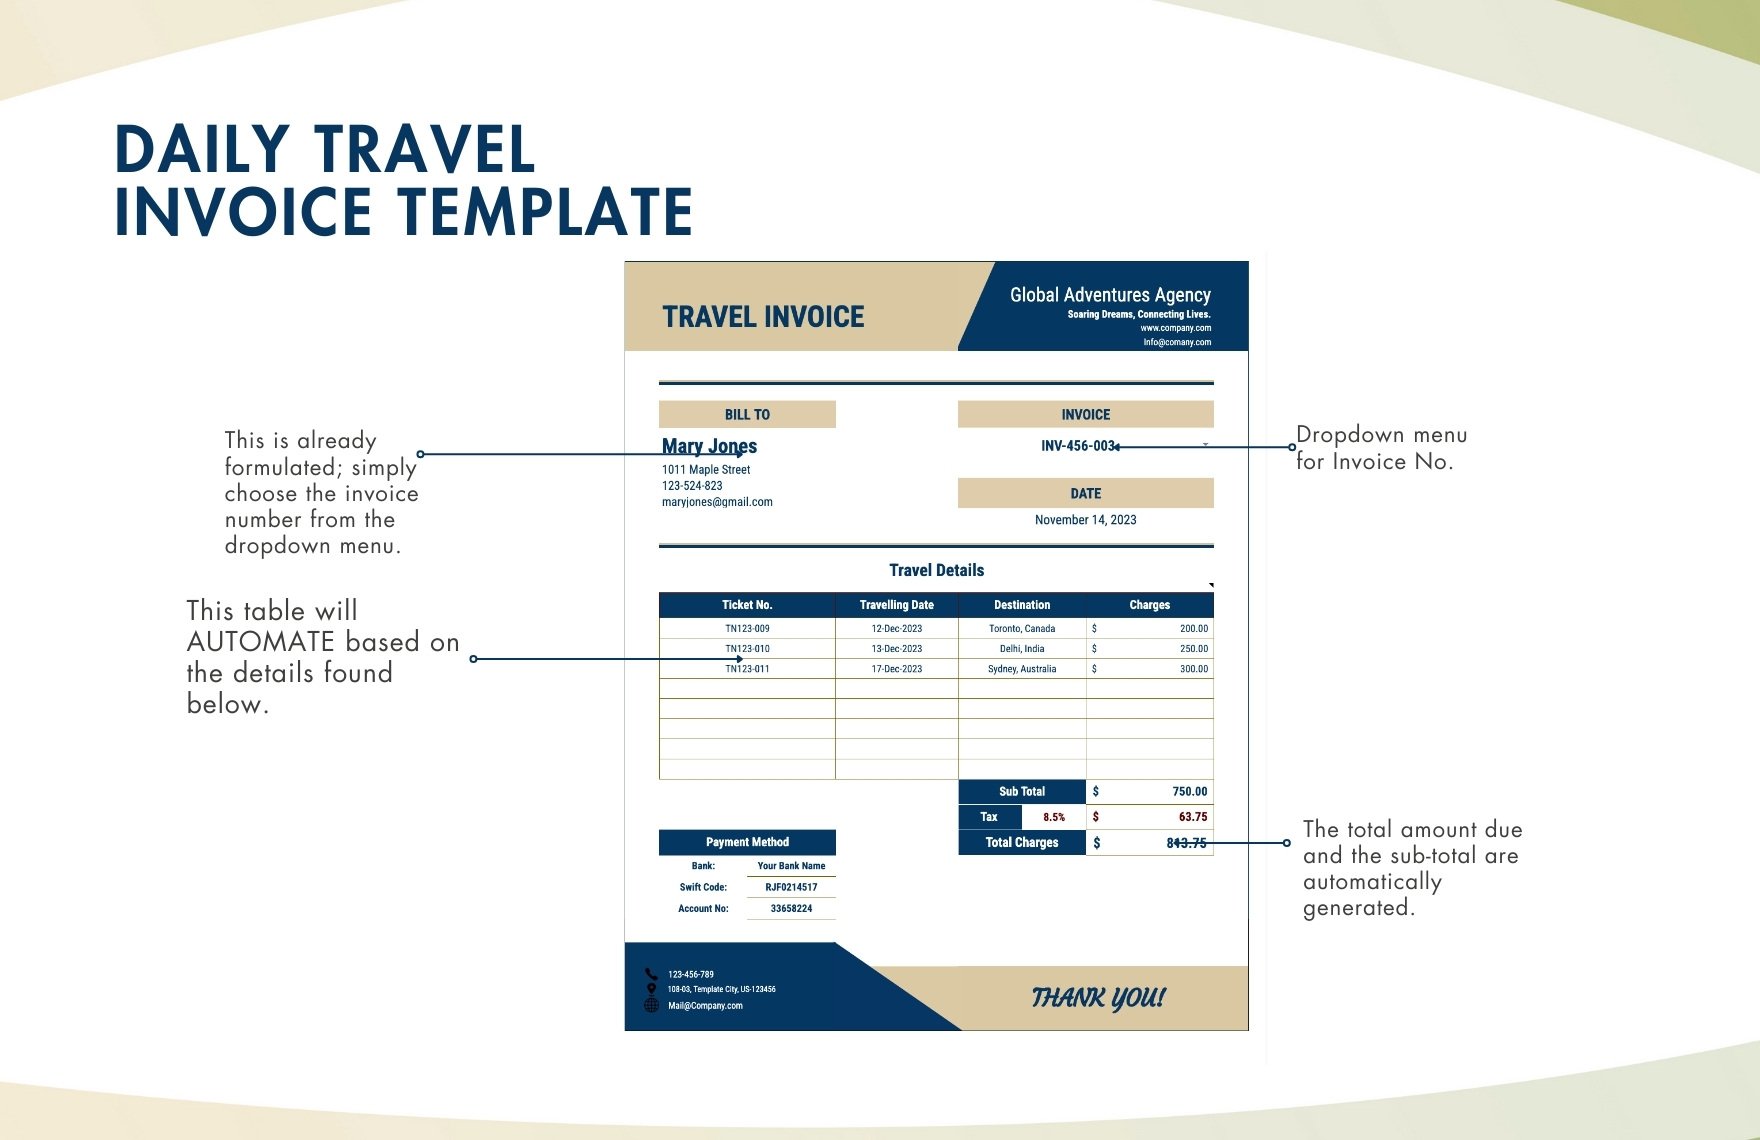 Daily Travel Invoice Template